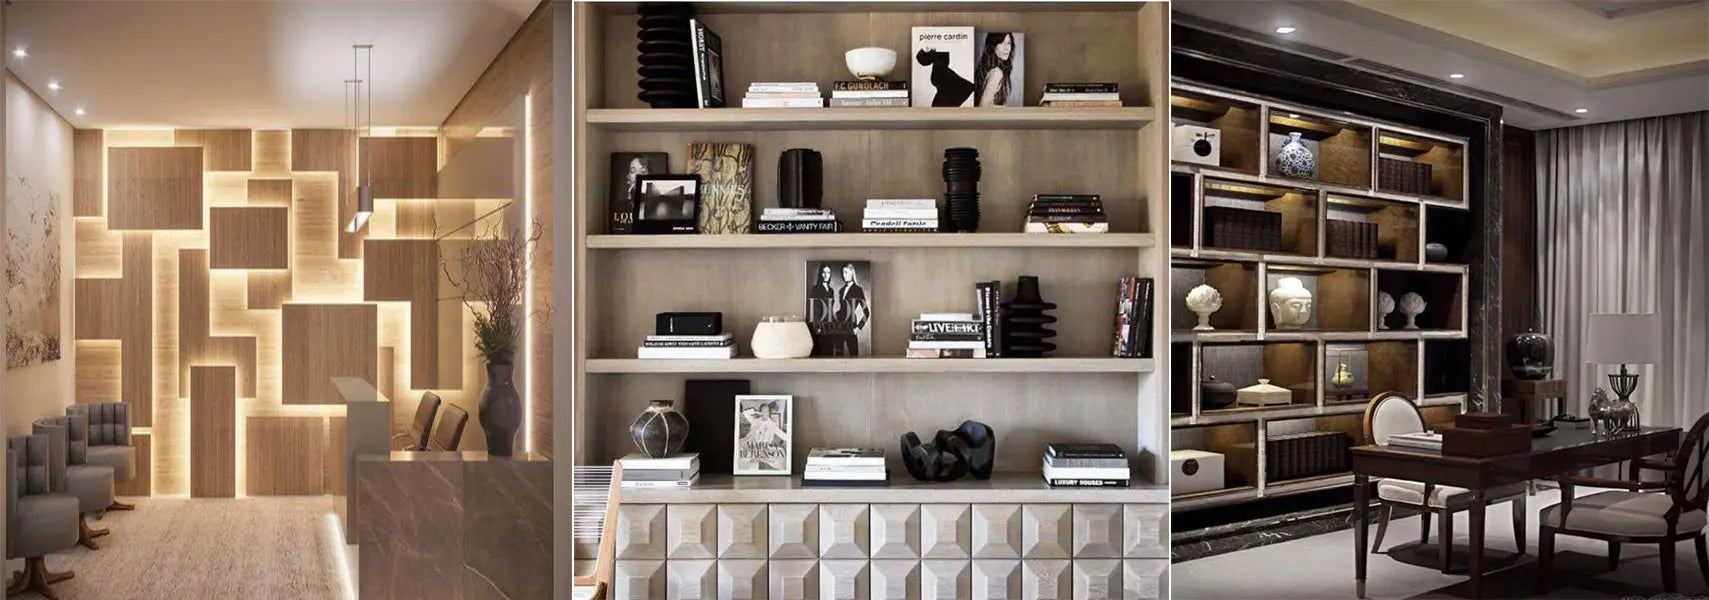 Angie Kripalani Design's Storage Spaces to Highlight Your Wall Elevation With Beautiful Shelves In Modern and Fusion Design.